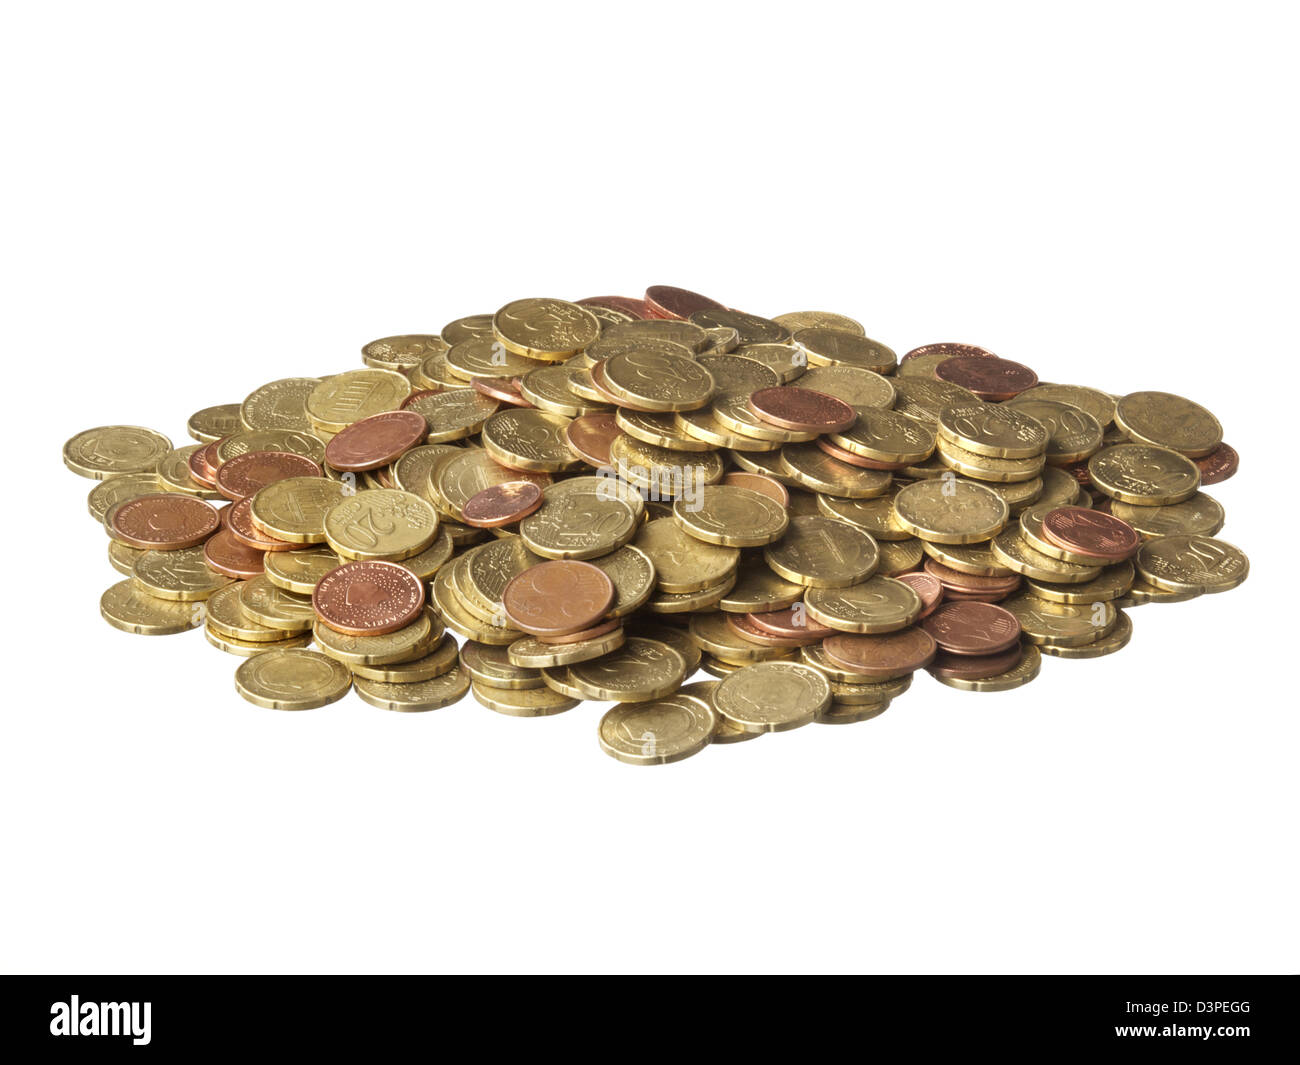 Small change, big heap of Euro coins on white background. mainly 20 and 5 cent coins Stock Photo